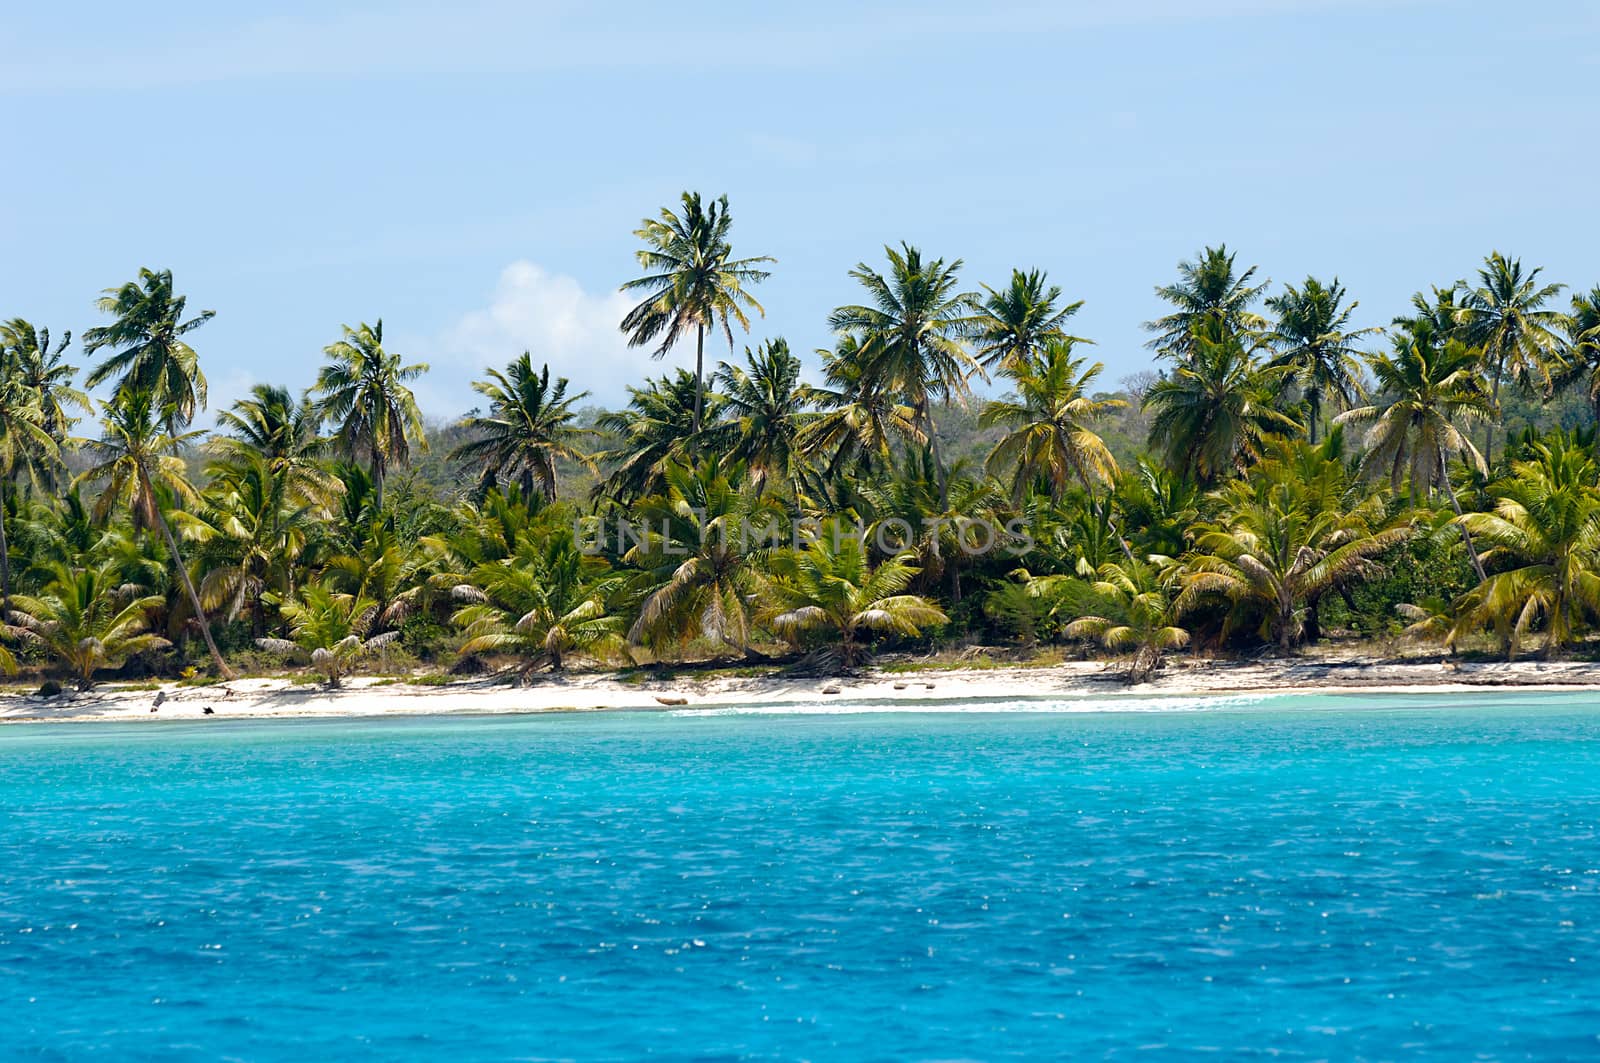 Empty caribbean island with a nice beach and green palms. The picture of the beach is taken from a boat on sea.